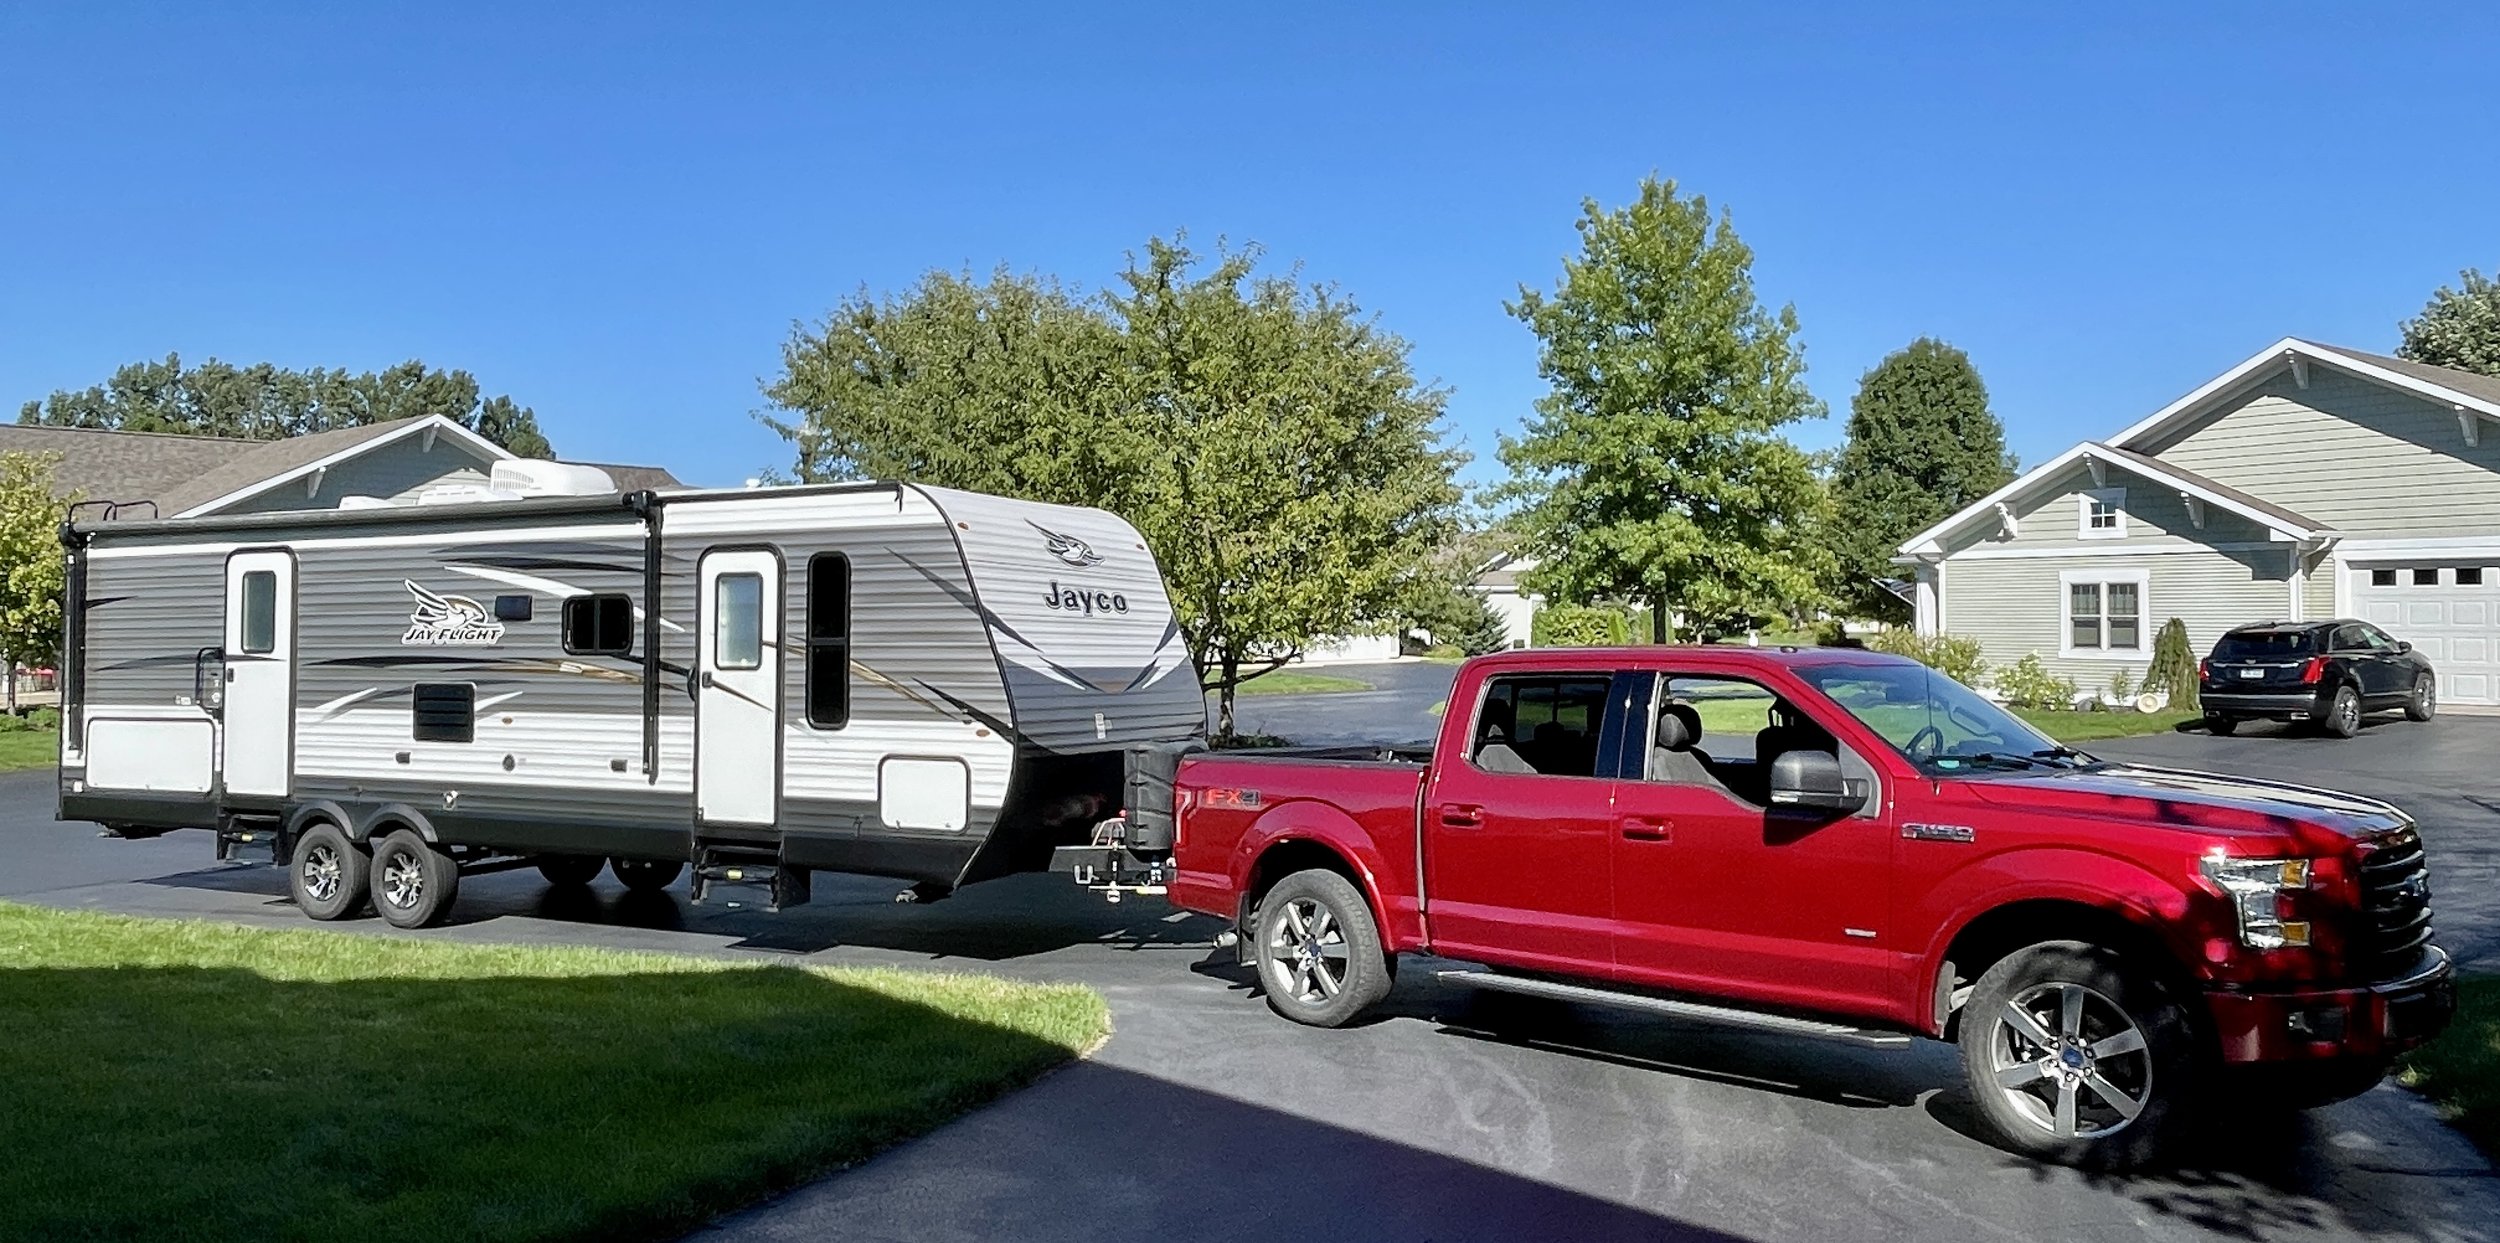  Darrel’s pride and joy; 2016 Ford F150 and Jayco camping trailer. 